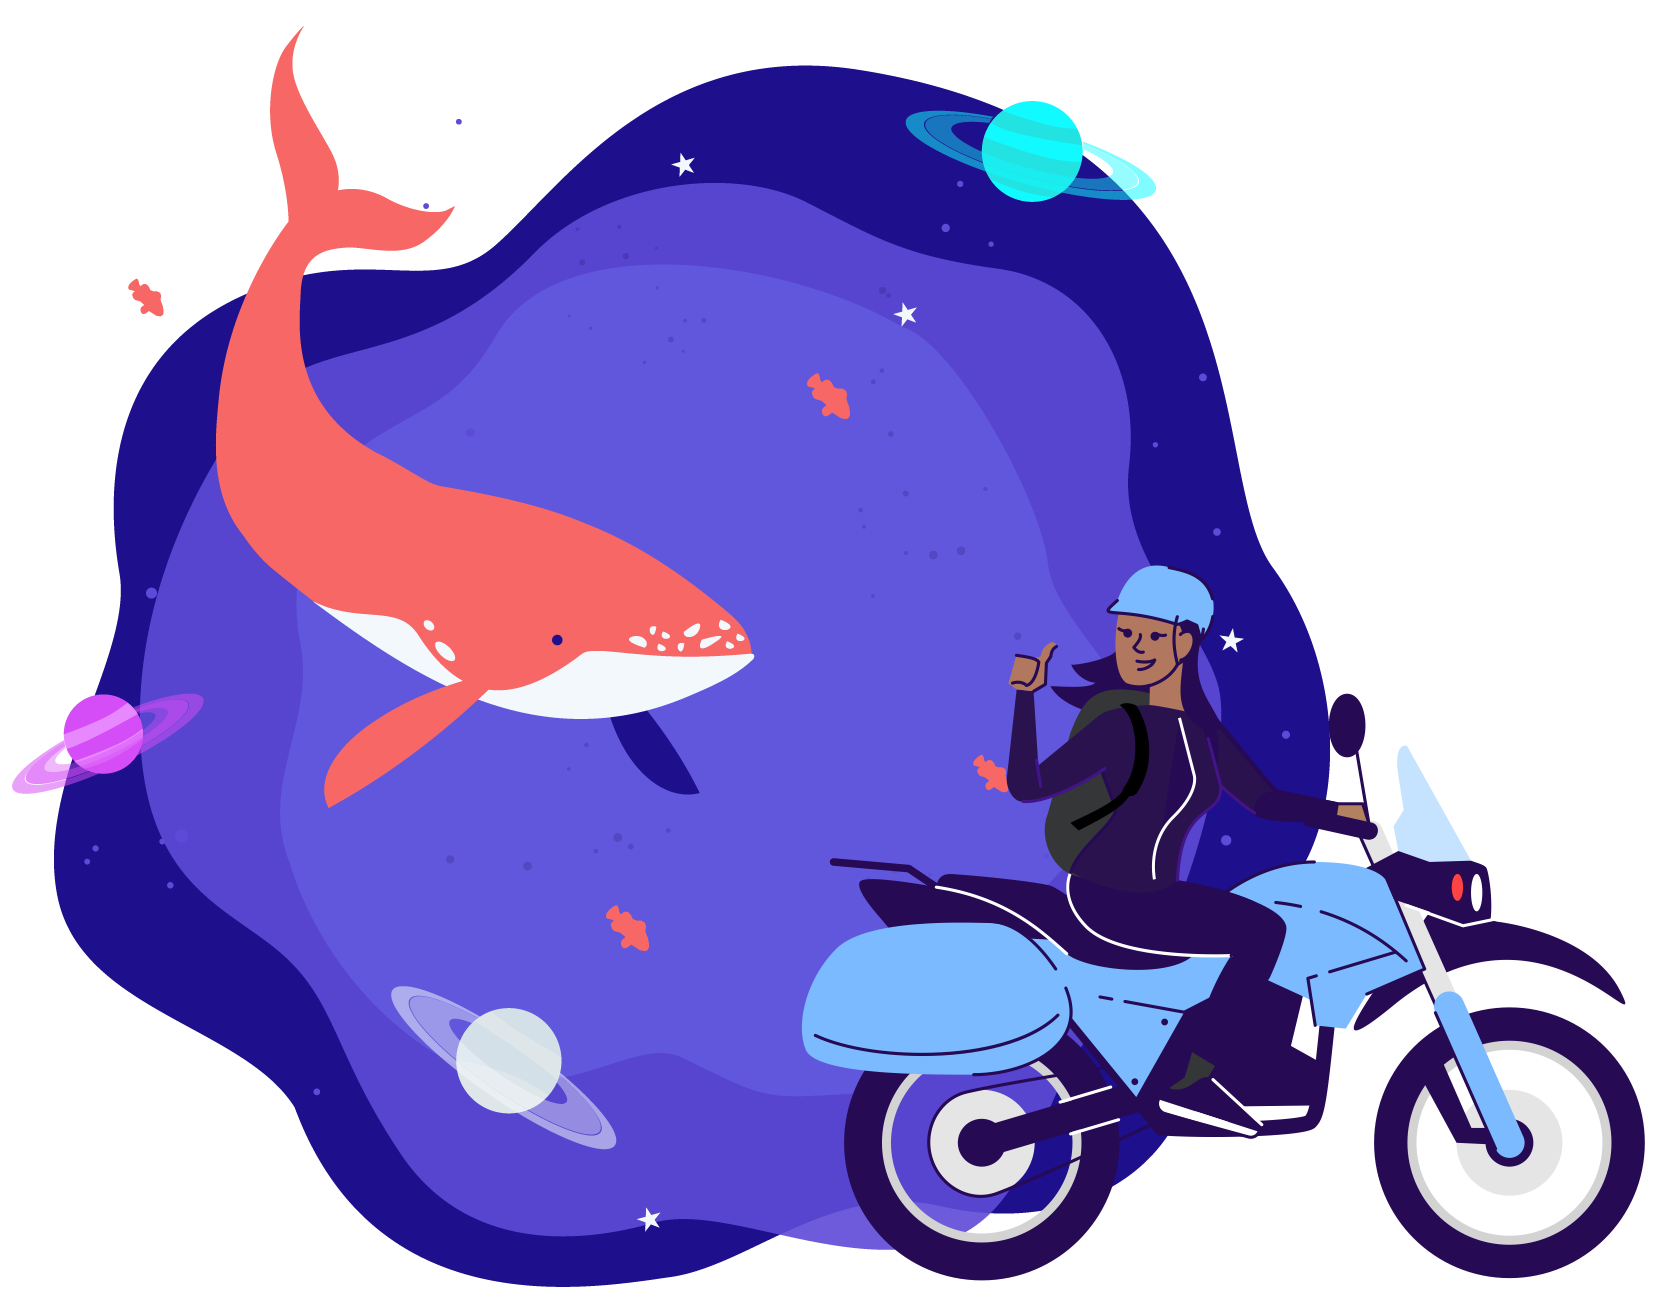 Woman riding a motorcycle through space, followed by a whale.